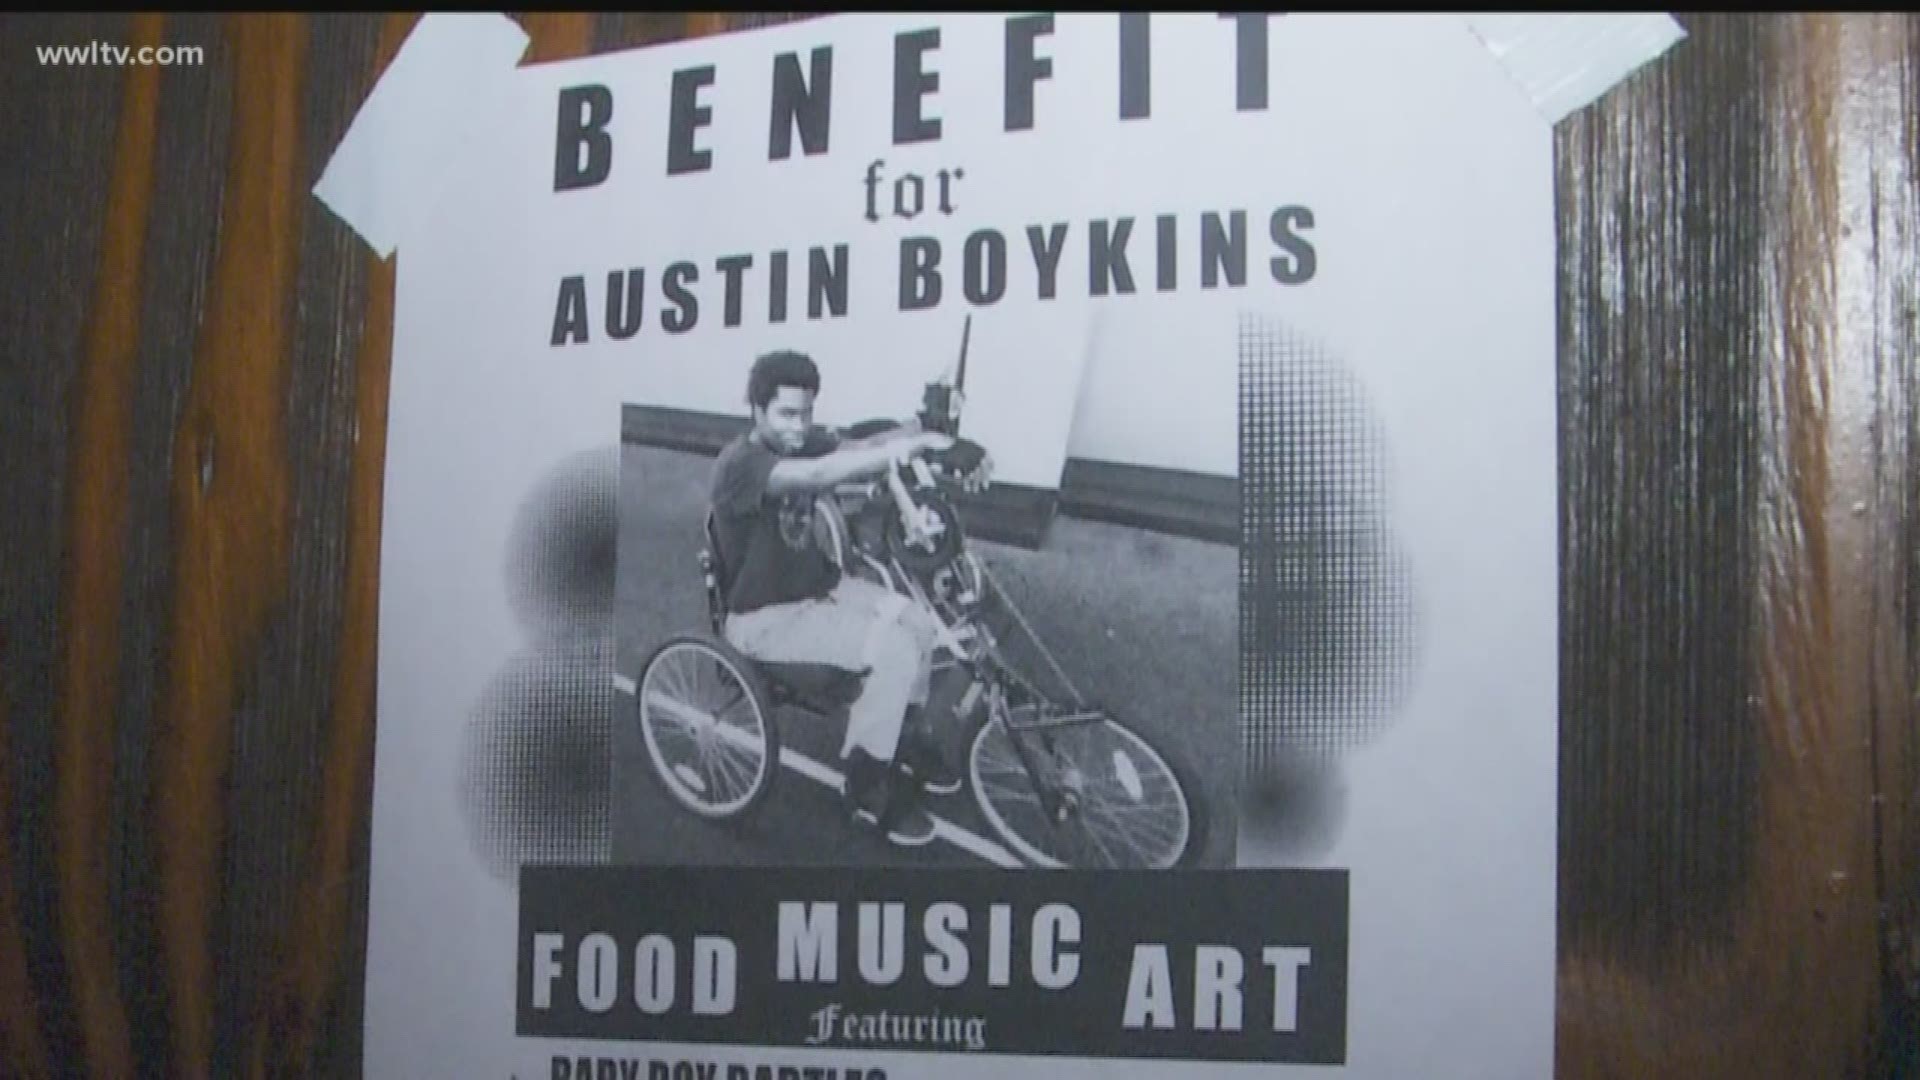 Last month, 22-year-old Austin Boykins was walking to a bus stop when two men robbed and shot him, leaving him paralyzed from the waist down and more than $70,000 dollars in medical debt.